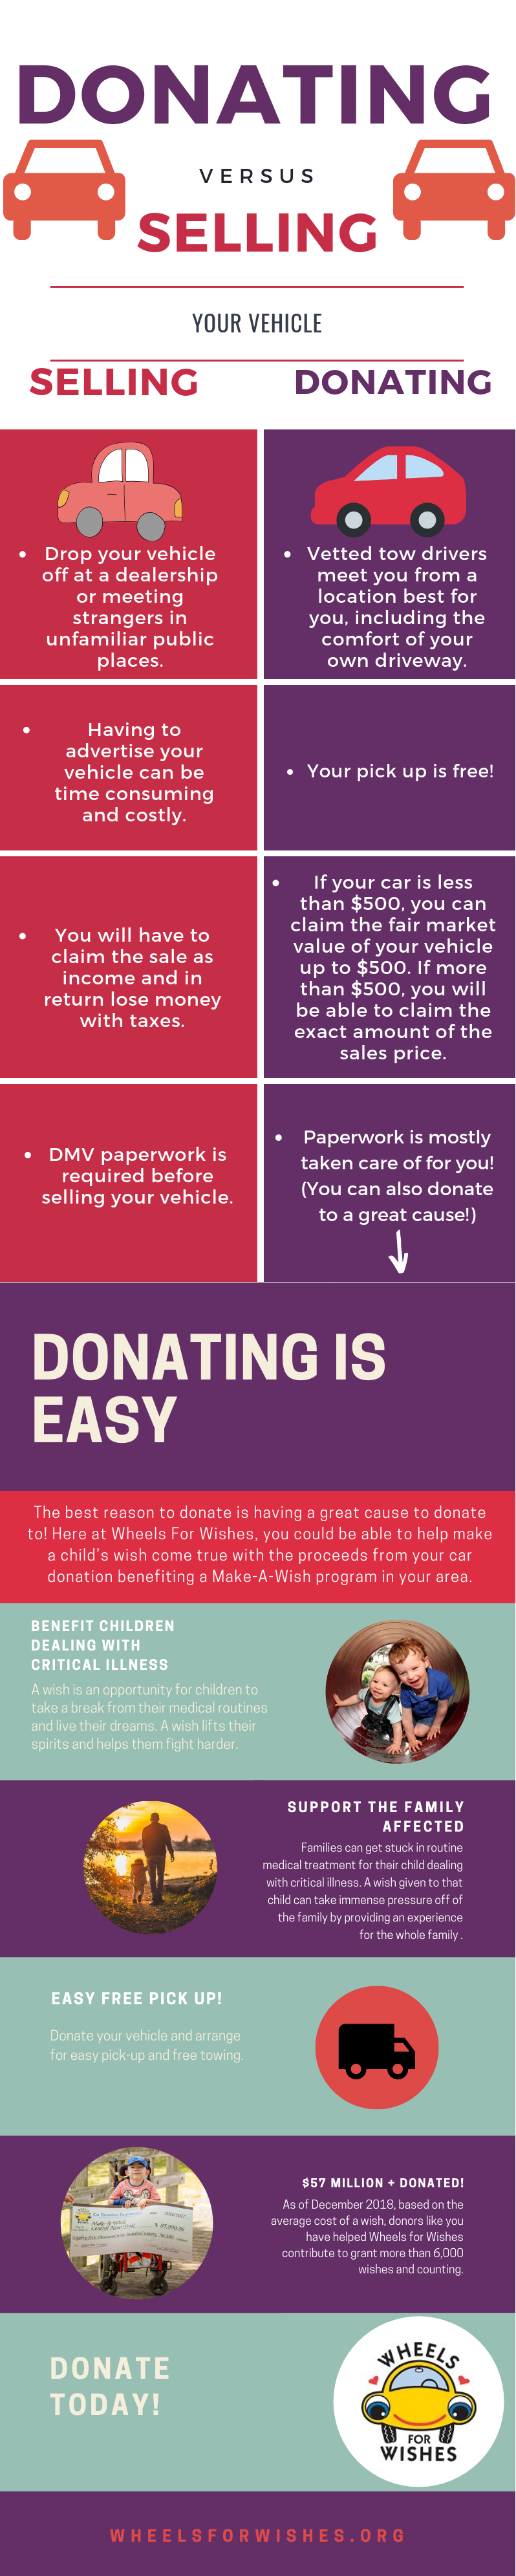 Donating vs. Selling Your Vehicle